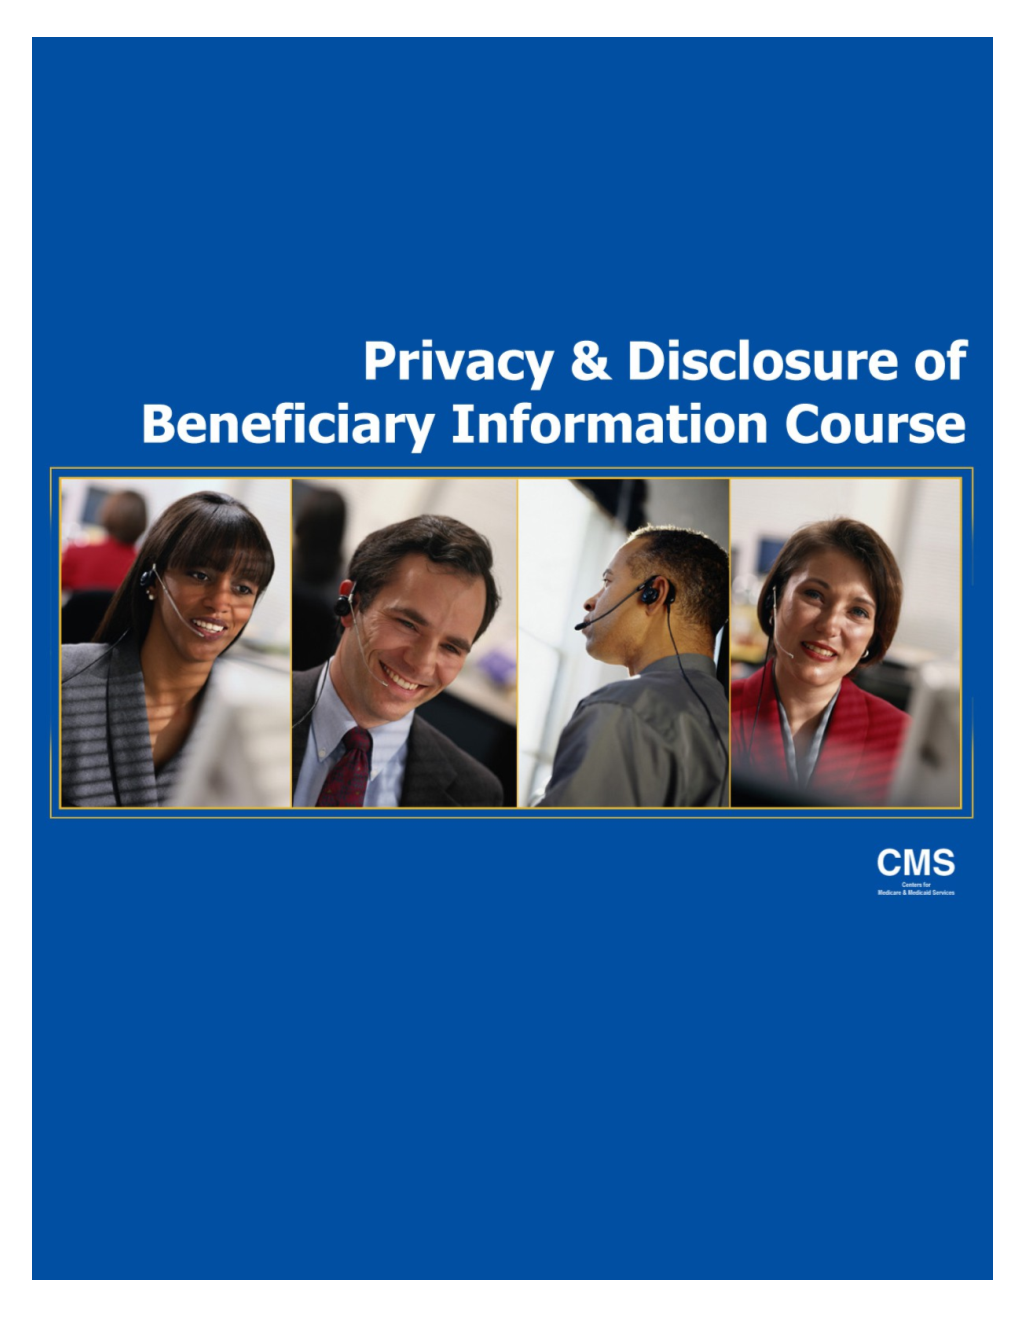 Privacy and Disclosure of Beneficiary